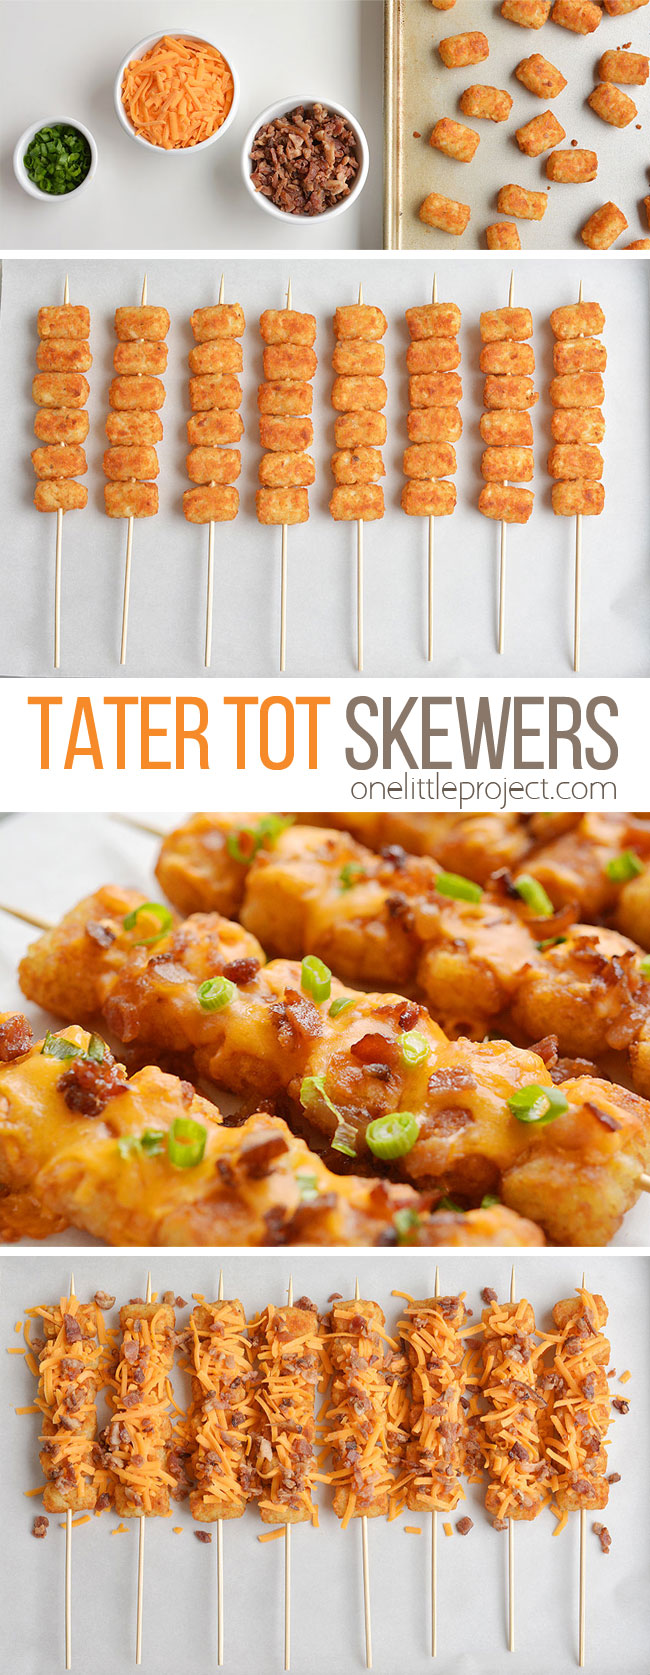 These loaded tater tot skewers are so delicious and they're really easy to make! This is such an easy appetizer recipe. It's great for game day and parties but it also makes a fun side dish for dinner. Loaded with cheese and bacon these are soooo good!